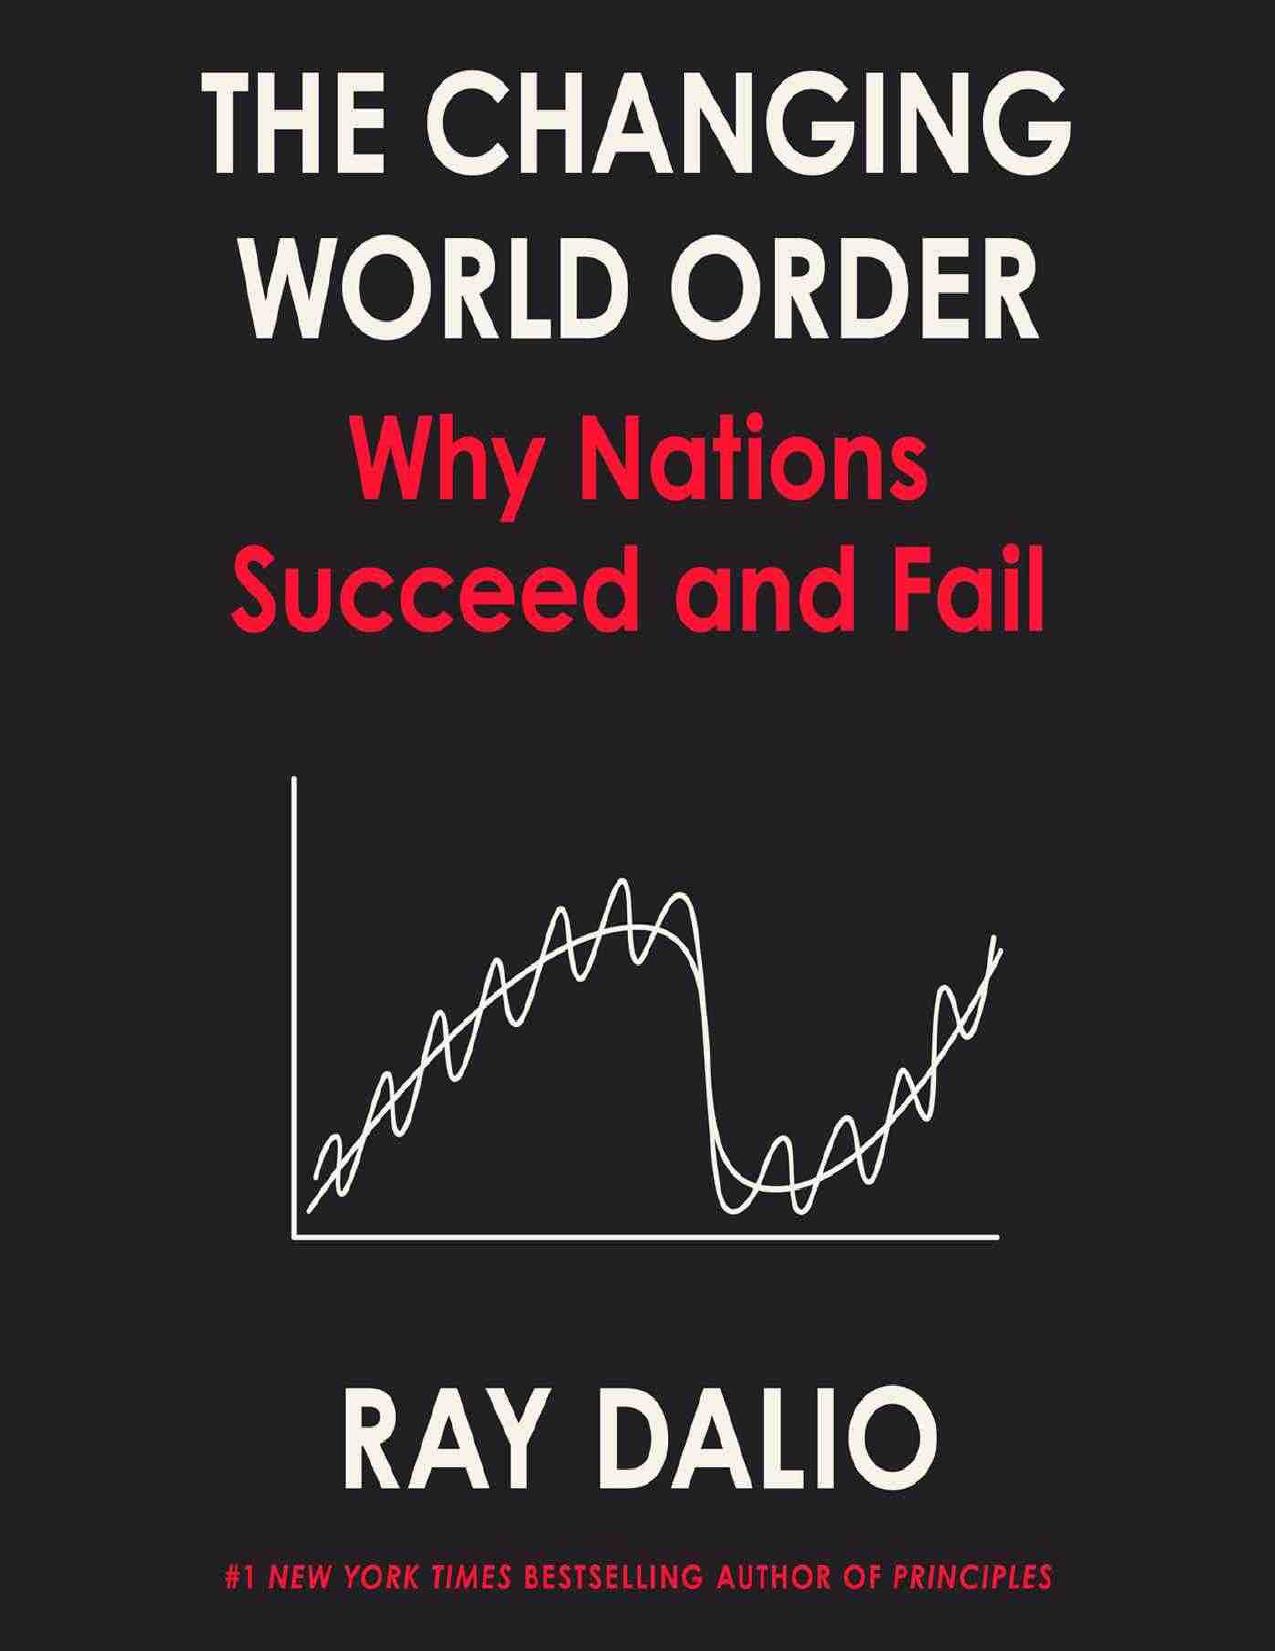 principles dealing with changing world order